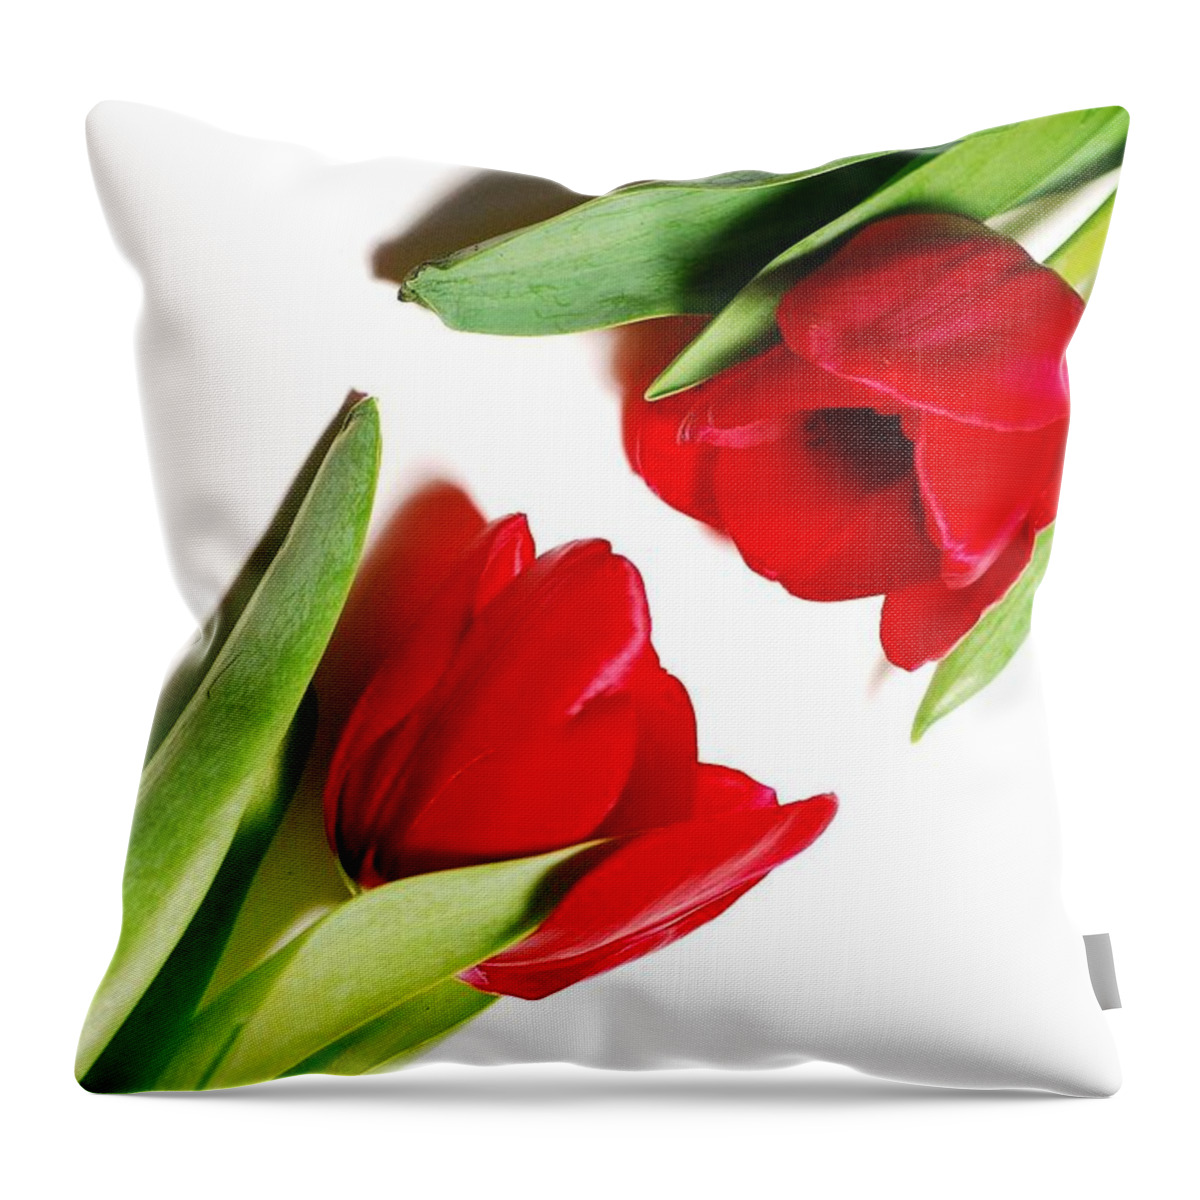 White Background Throw Pillow featuring the photograph Touch Of Red by Diana Lee Angstadt